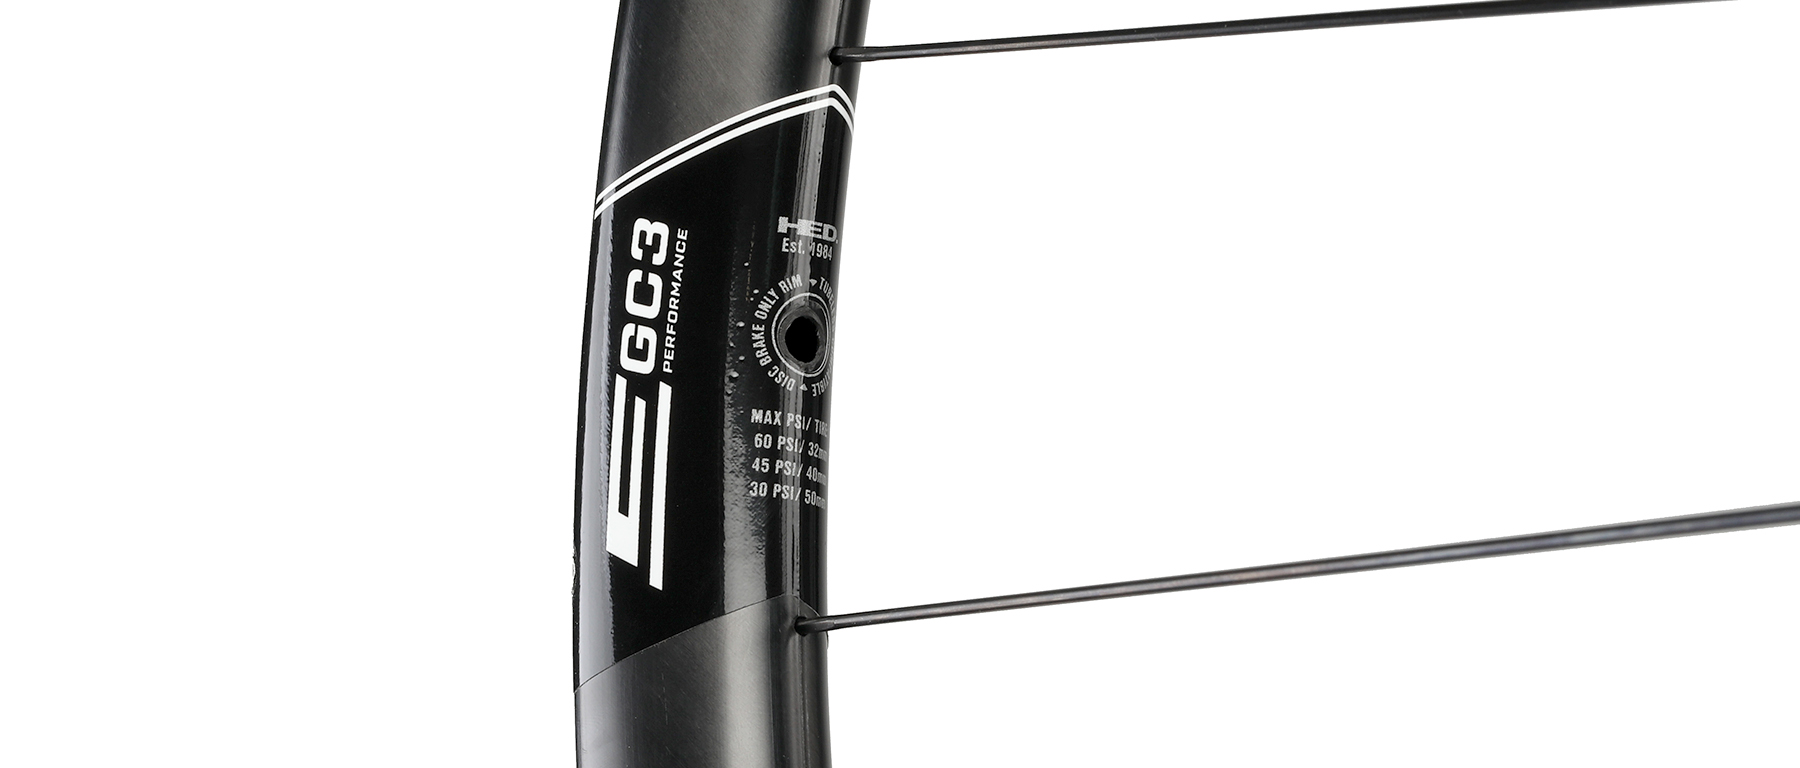 HED Emporia GC3 Performance Carbon Rear Wheel